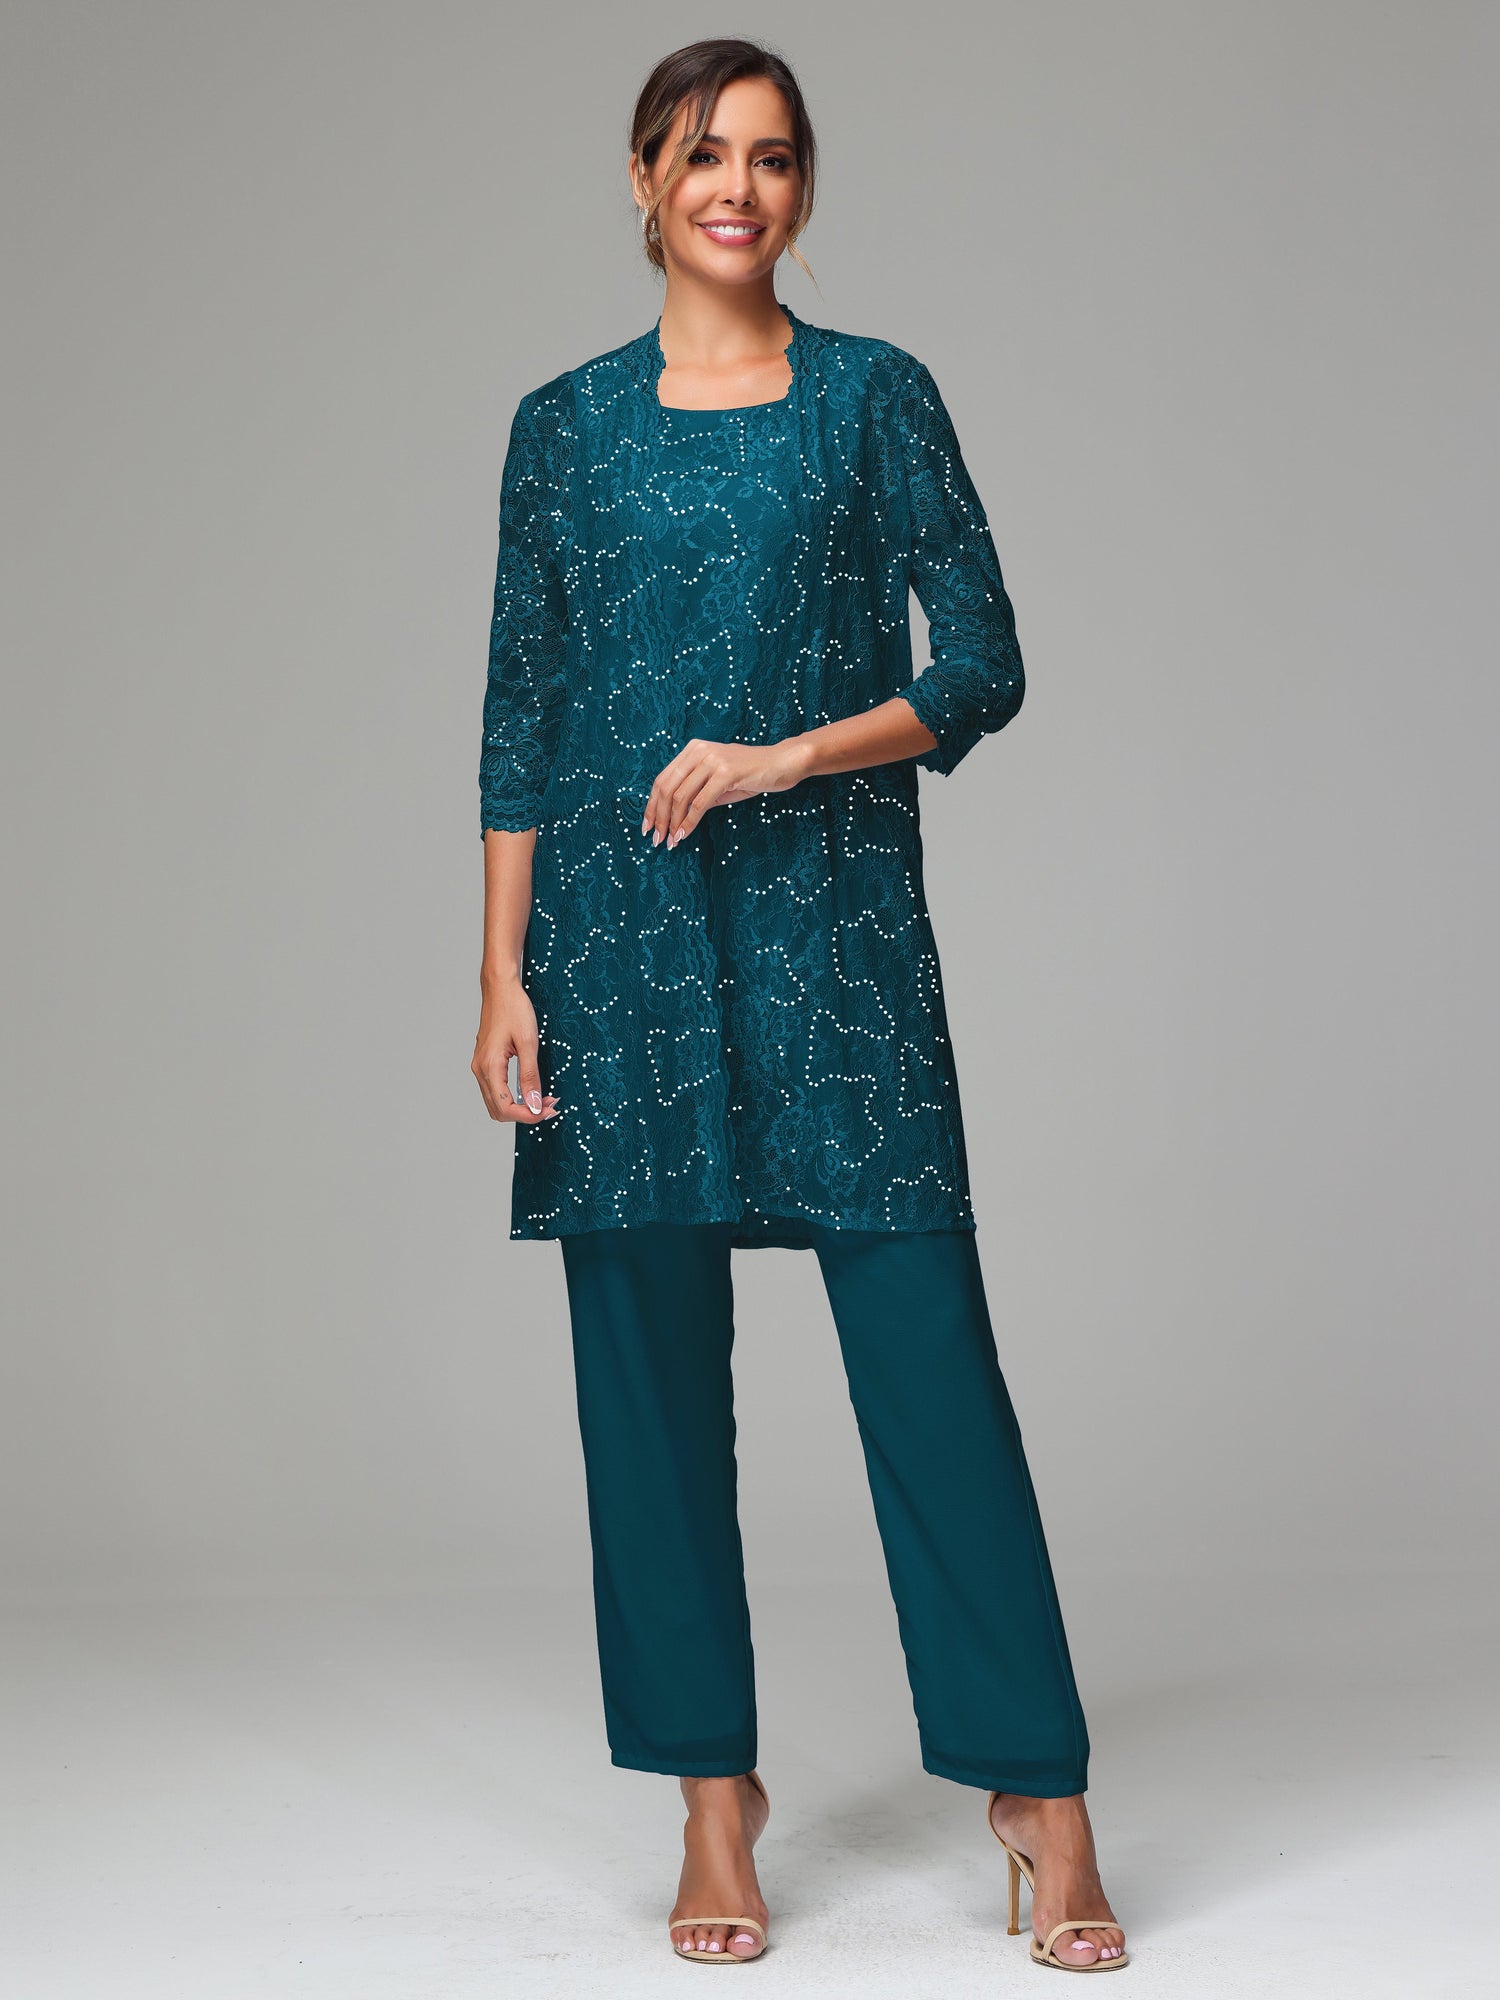 Chic Chiffon Lace Pant Suit For Mother Of The Bride/Groom Perfect For Bridal  Weddings And Evening Upcoming Events Style C295S From Wedswty68, $139.13